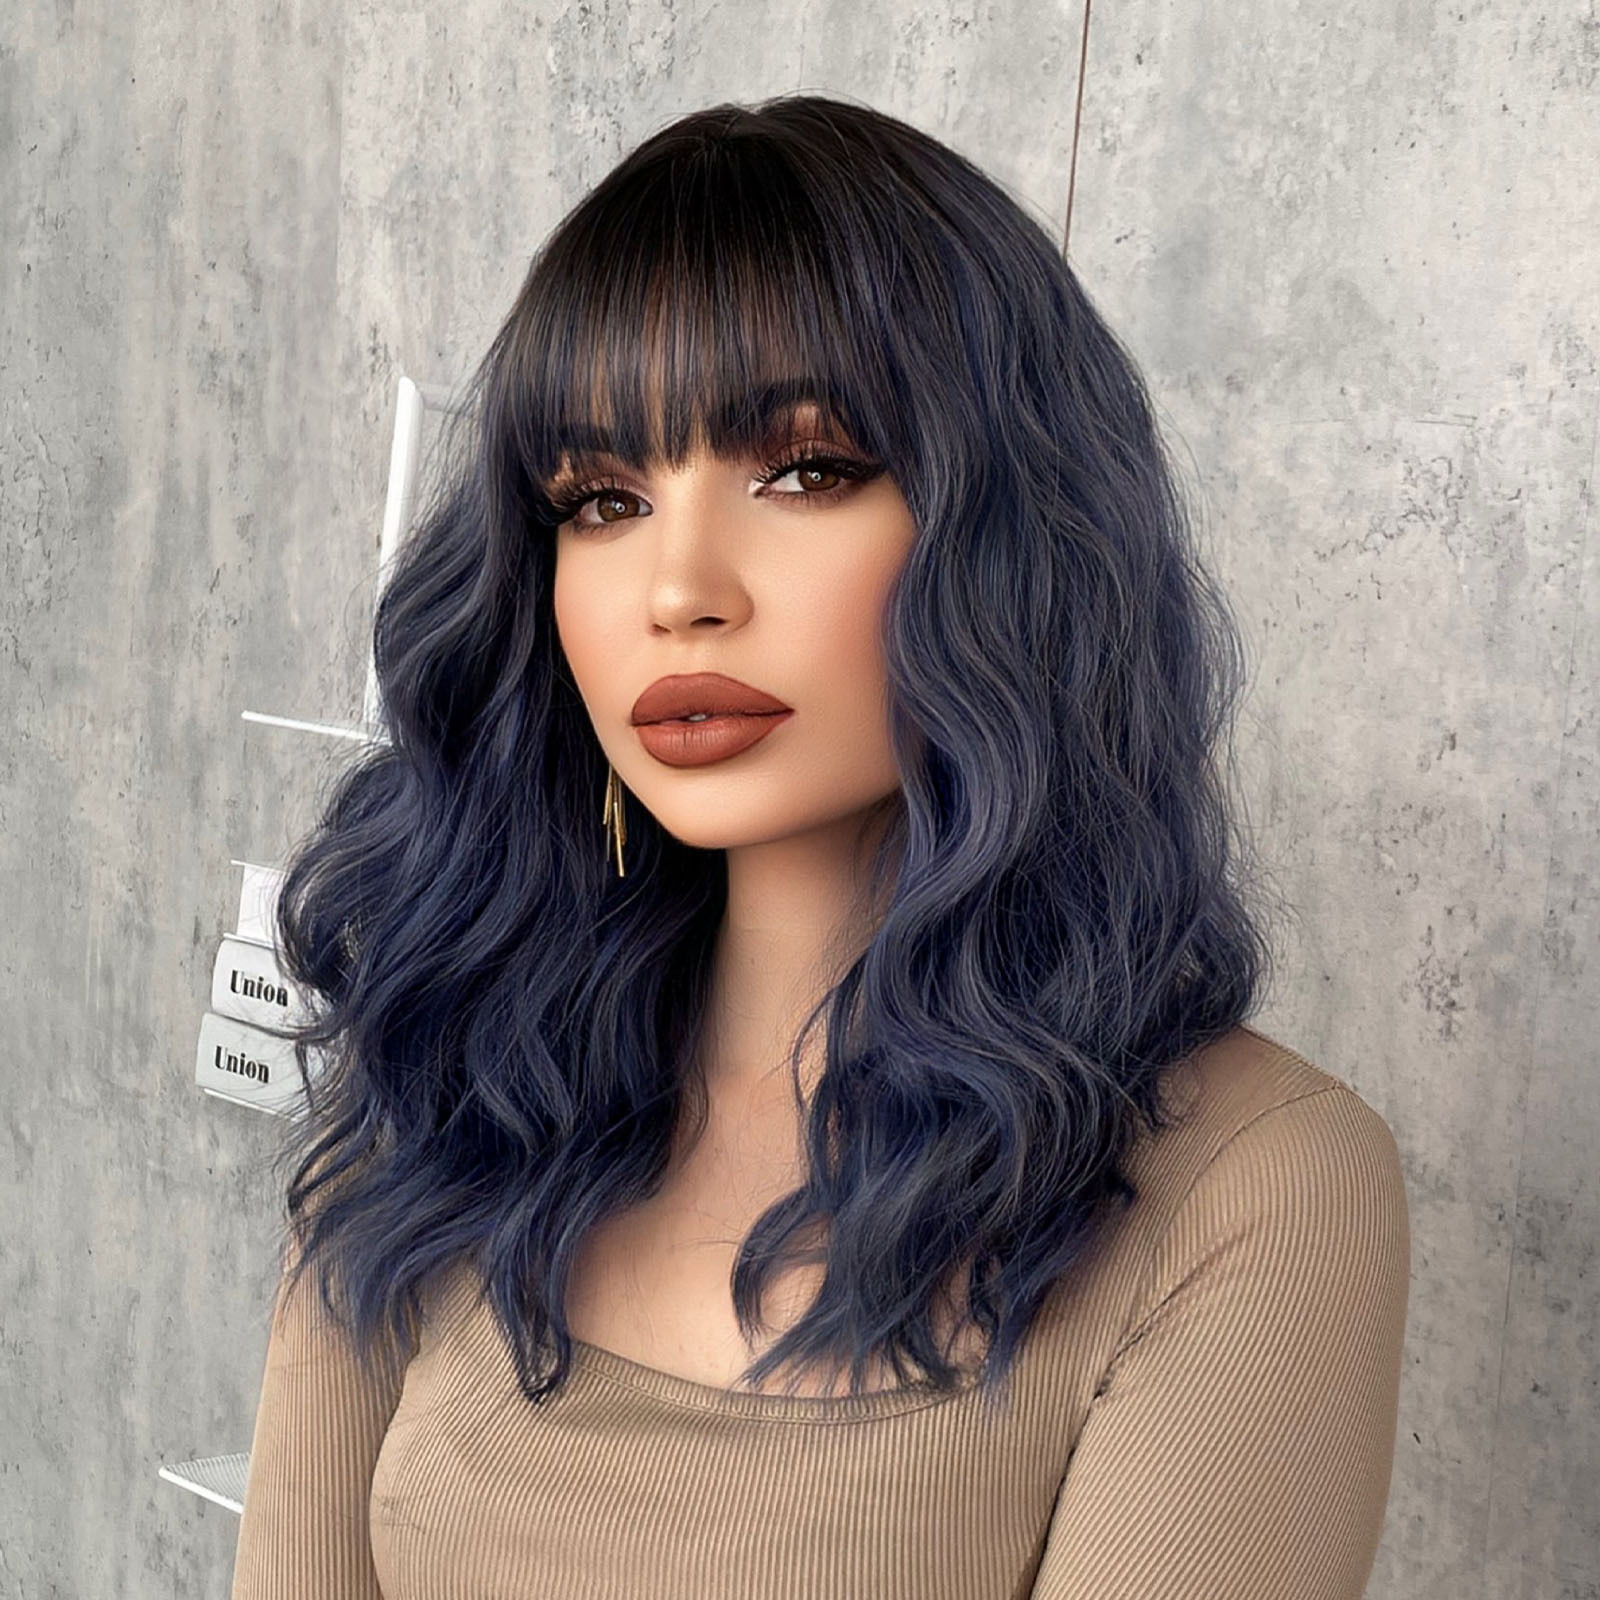 A stylish synthetic wig in female haze blue, featuring wavy medium-length curly hair, perfect for a ready-to-go look